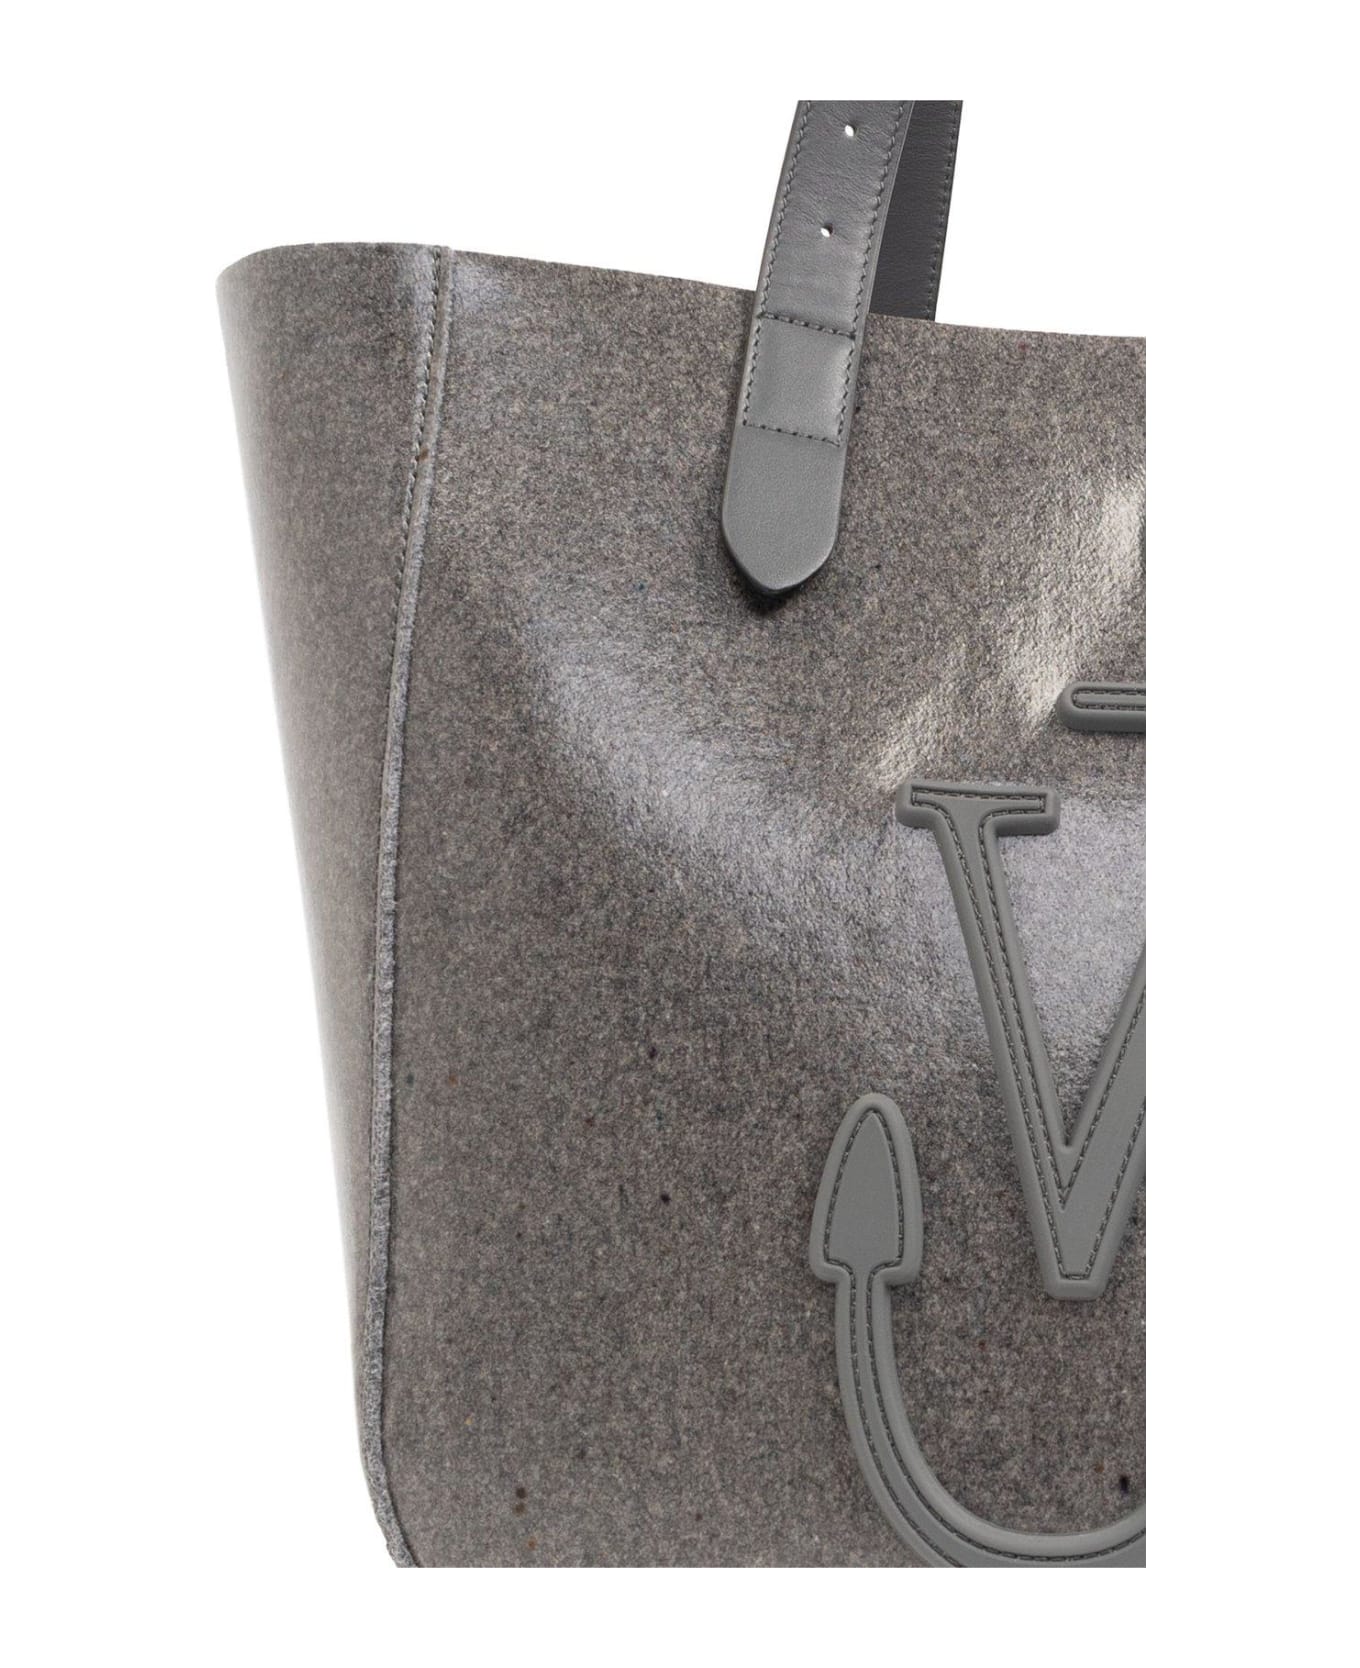 J.W. Anderson Belt Anchor Patch Tote Bag - GREY